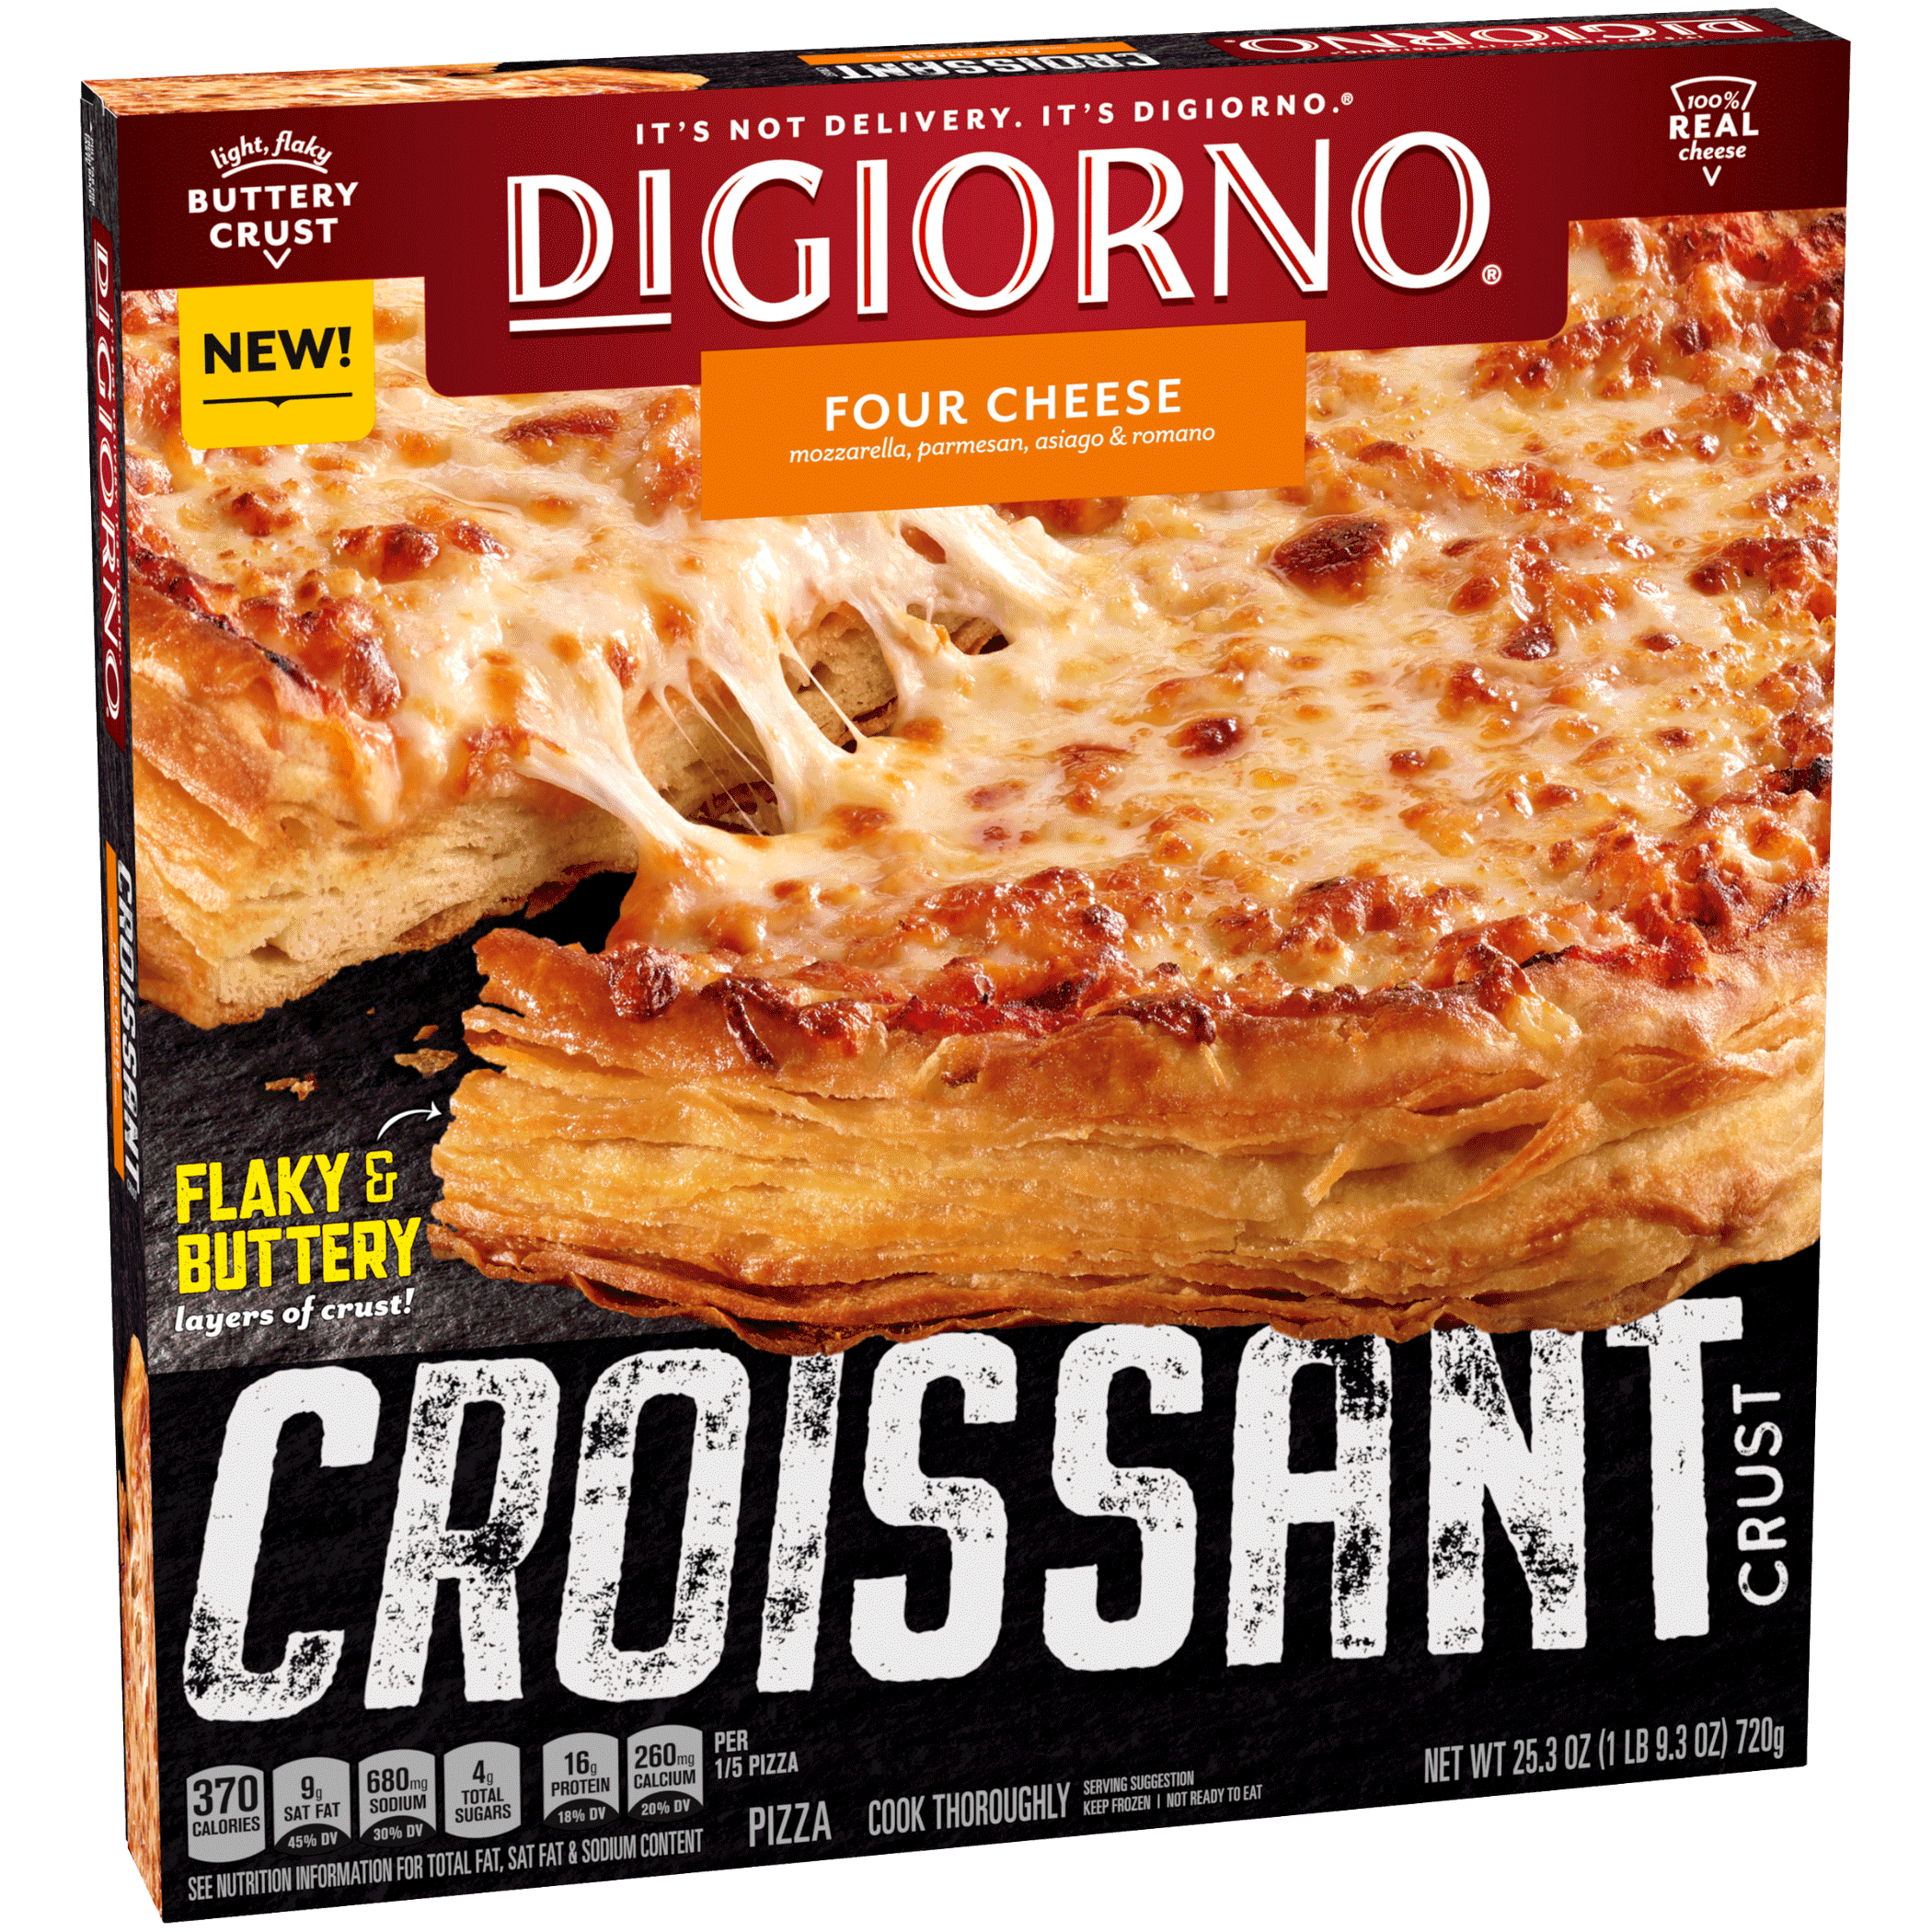 Ingredient, Cuisine, Font, Packaging, Box, Pizza, Crust, Cheese